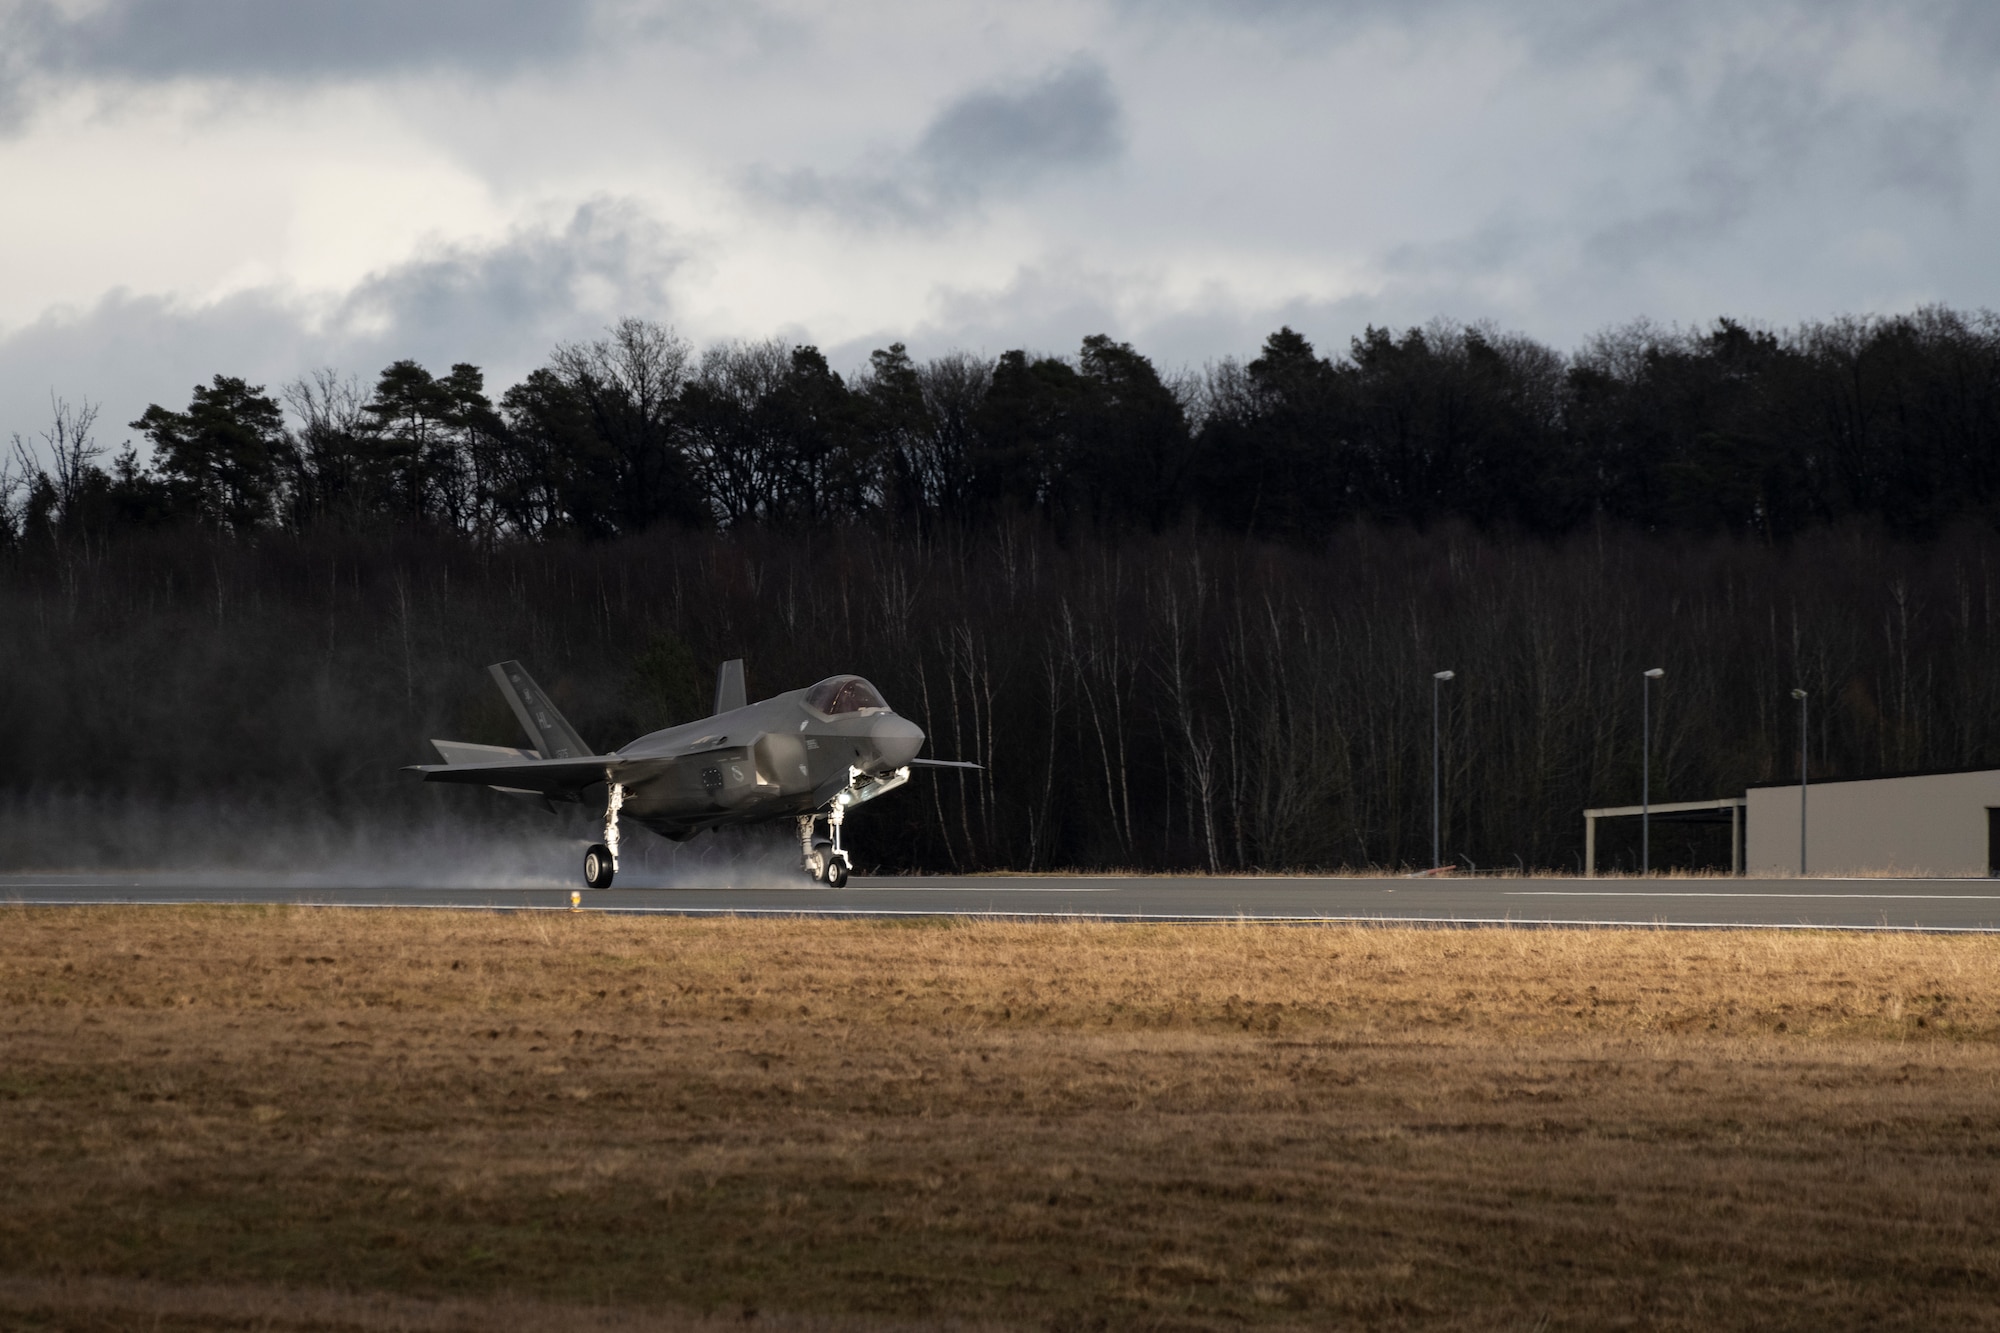 A U.S. Air Force F-35A Lightning II from the 34th Fighter Squadron at Hill Air Force Base, Utah, lands on the runway at Spangdahlem Air Base, Germany, Feb. 16, 2022, to increase NATO’s collective defense posture and enhance the capabilities of regional partners and allies.